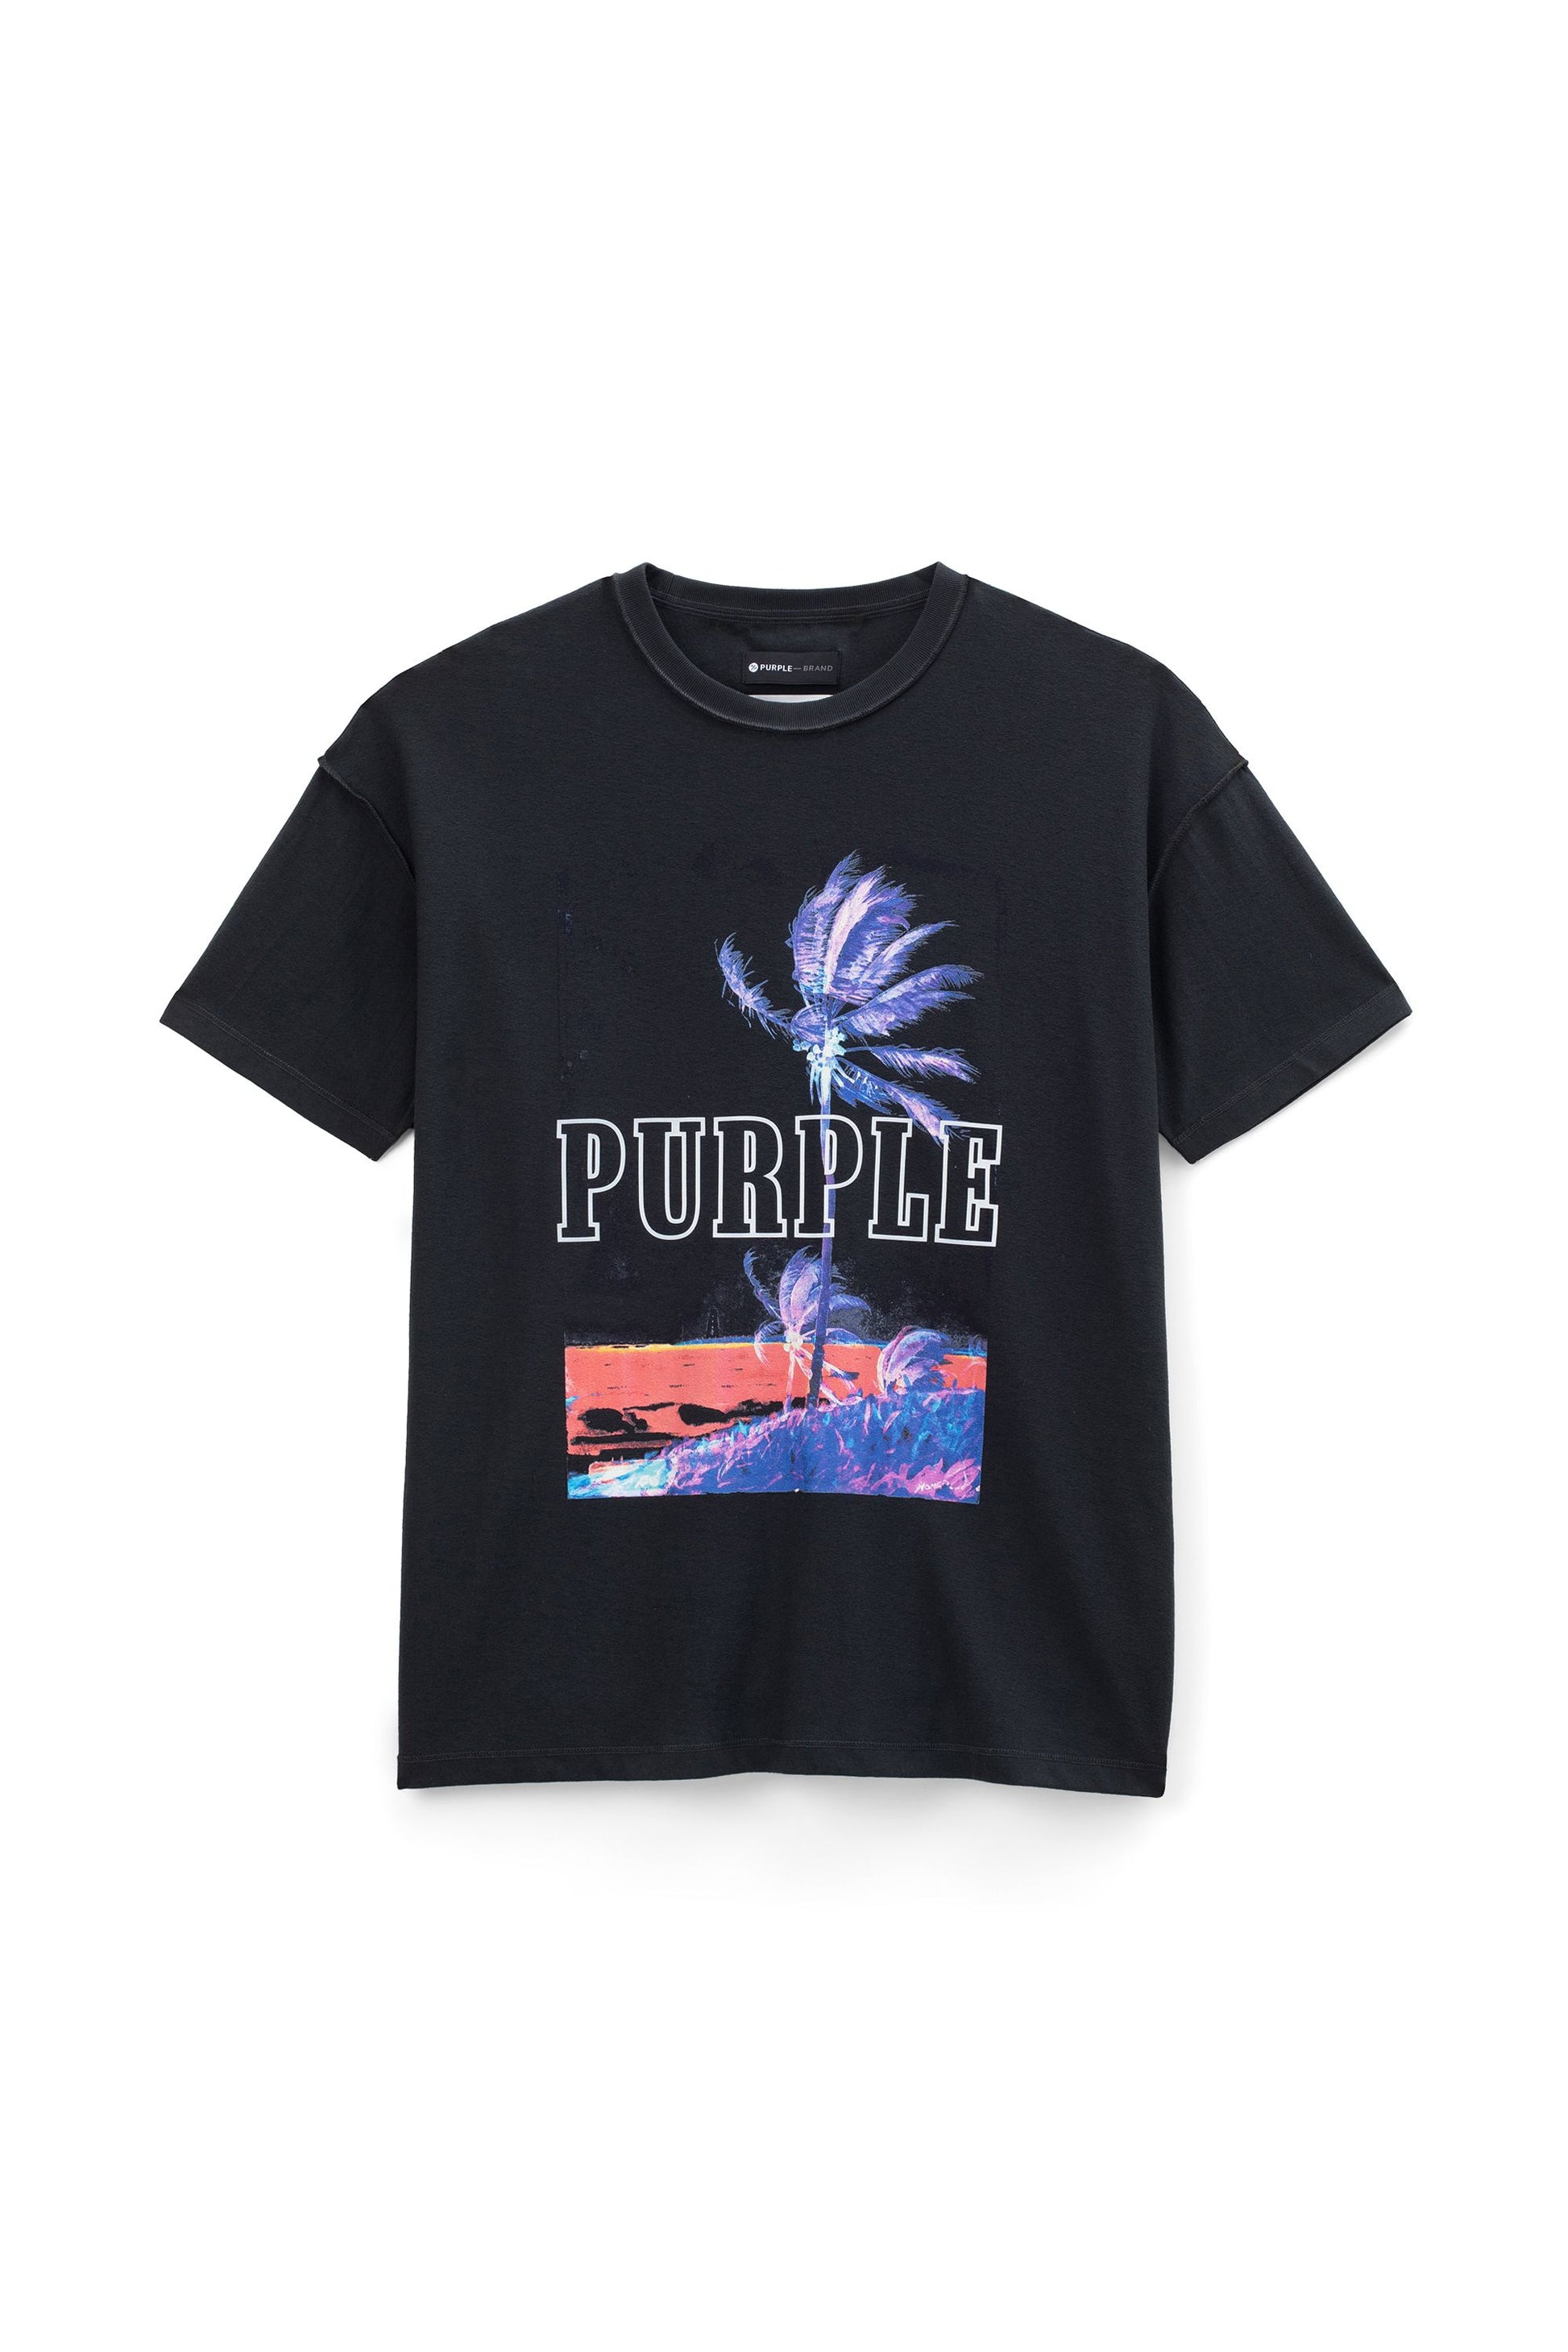 PURPLE BRAND - Men's Relaxed Fit T-Shirt - Style No. P101 - Palm Inside Out Wash Black - Front